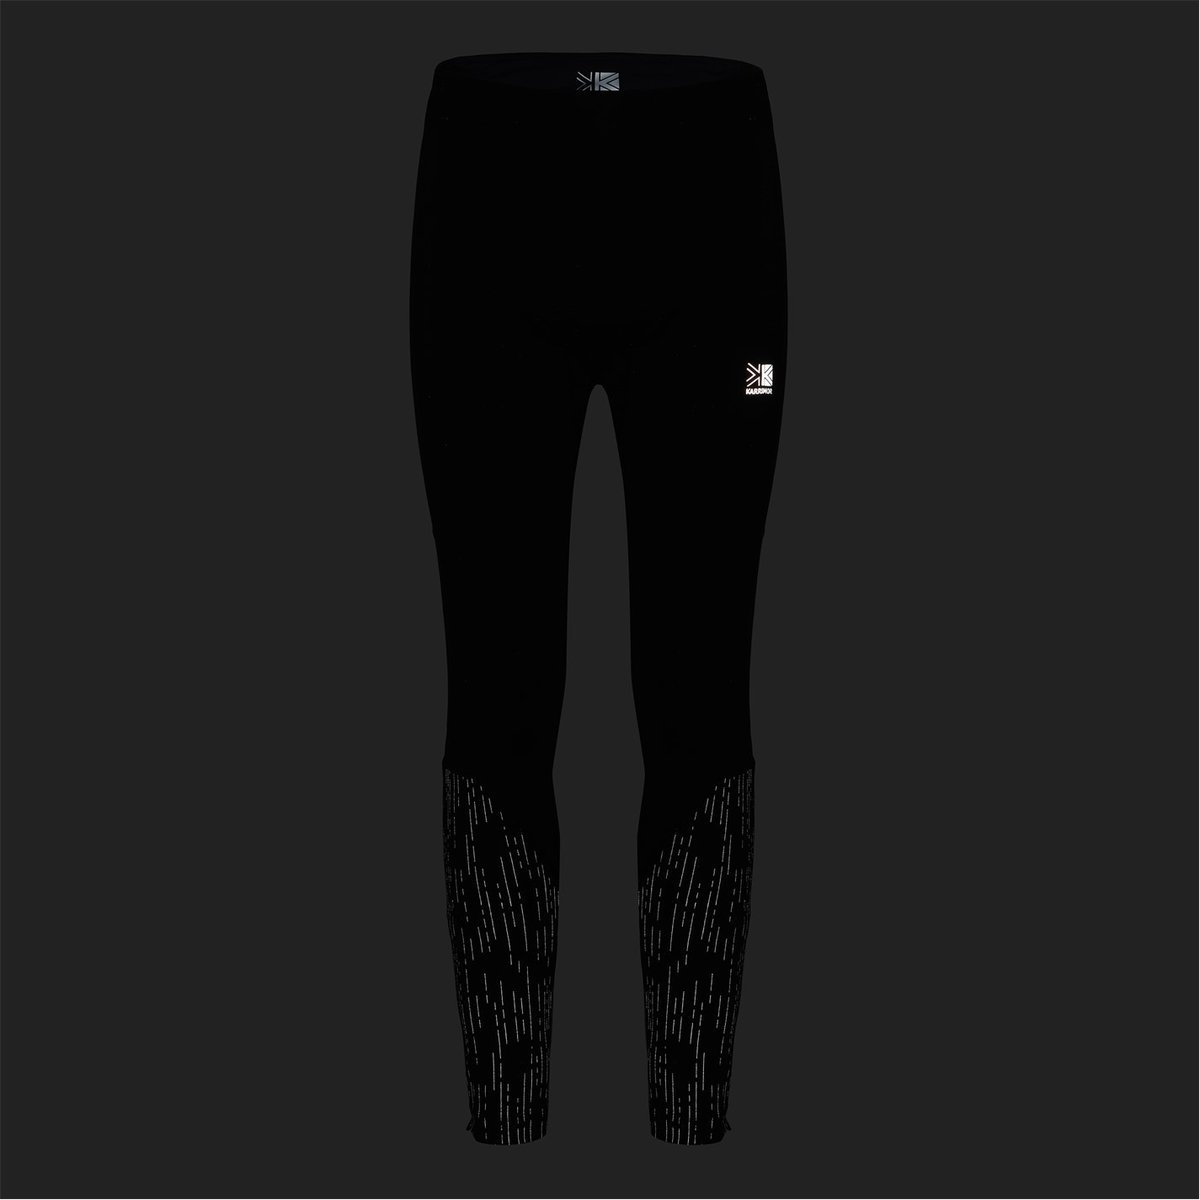 Clothing for cold weather Thermal Pants